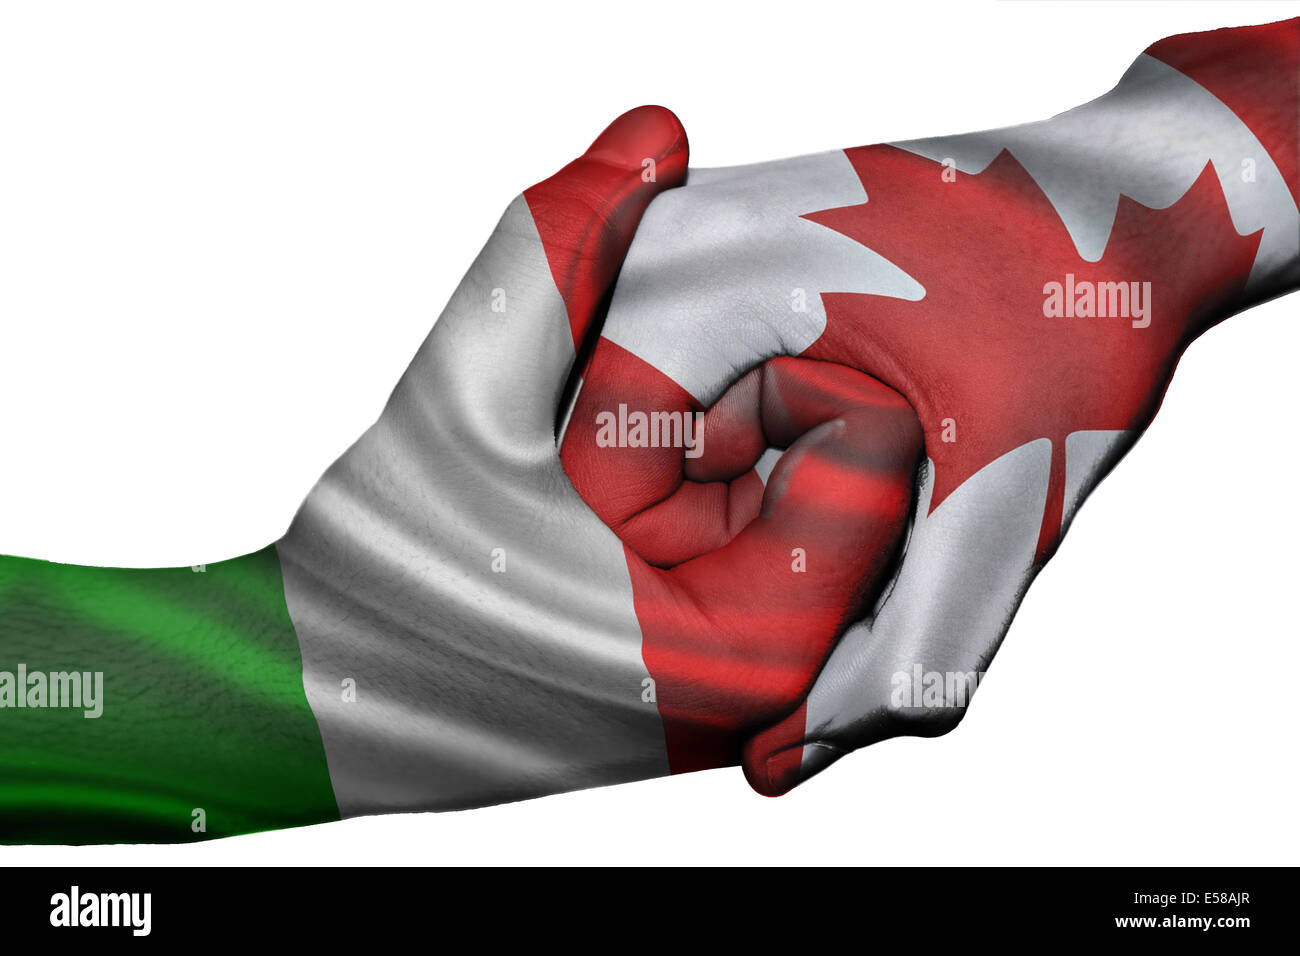 Diplomatic handshake between countries: flags of Italy and Canada overprinted the two hands Stock Photo